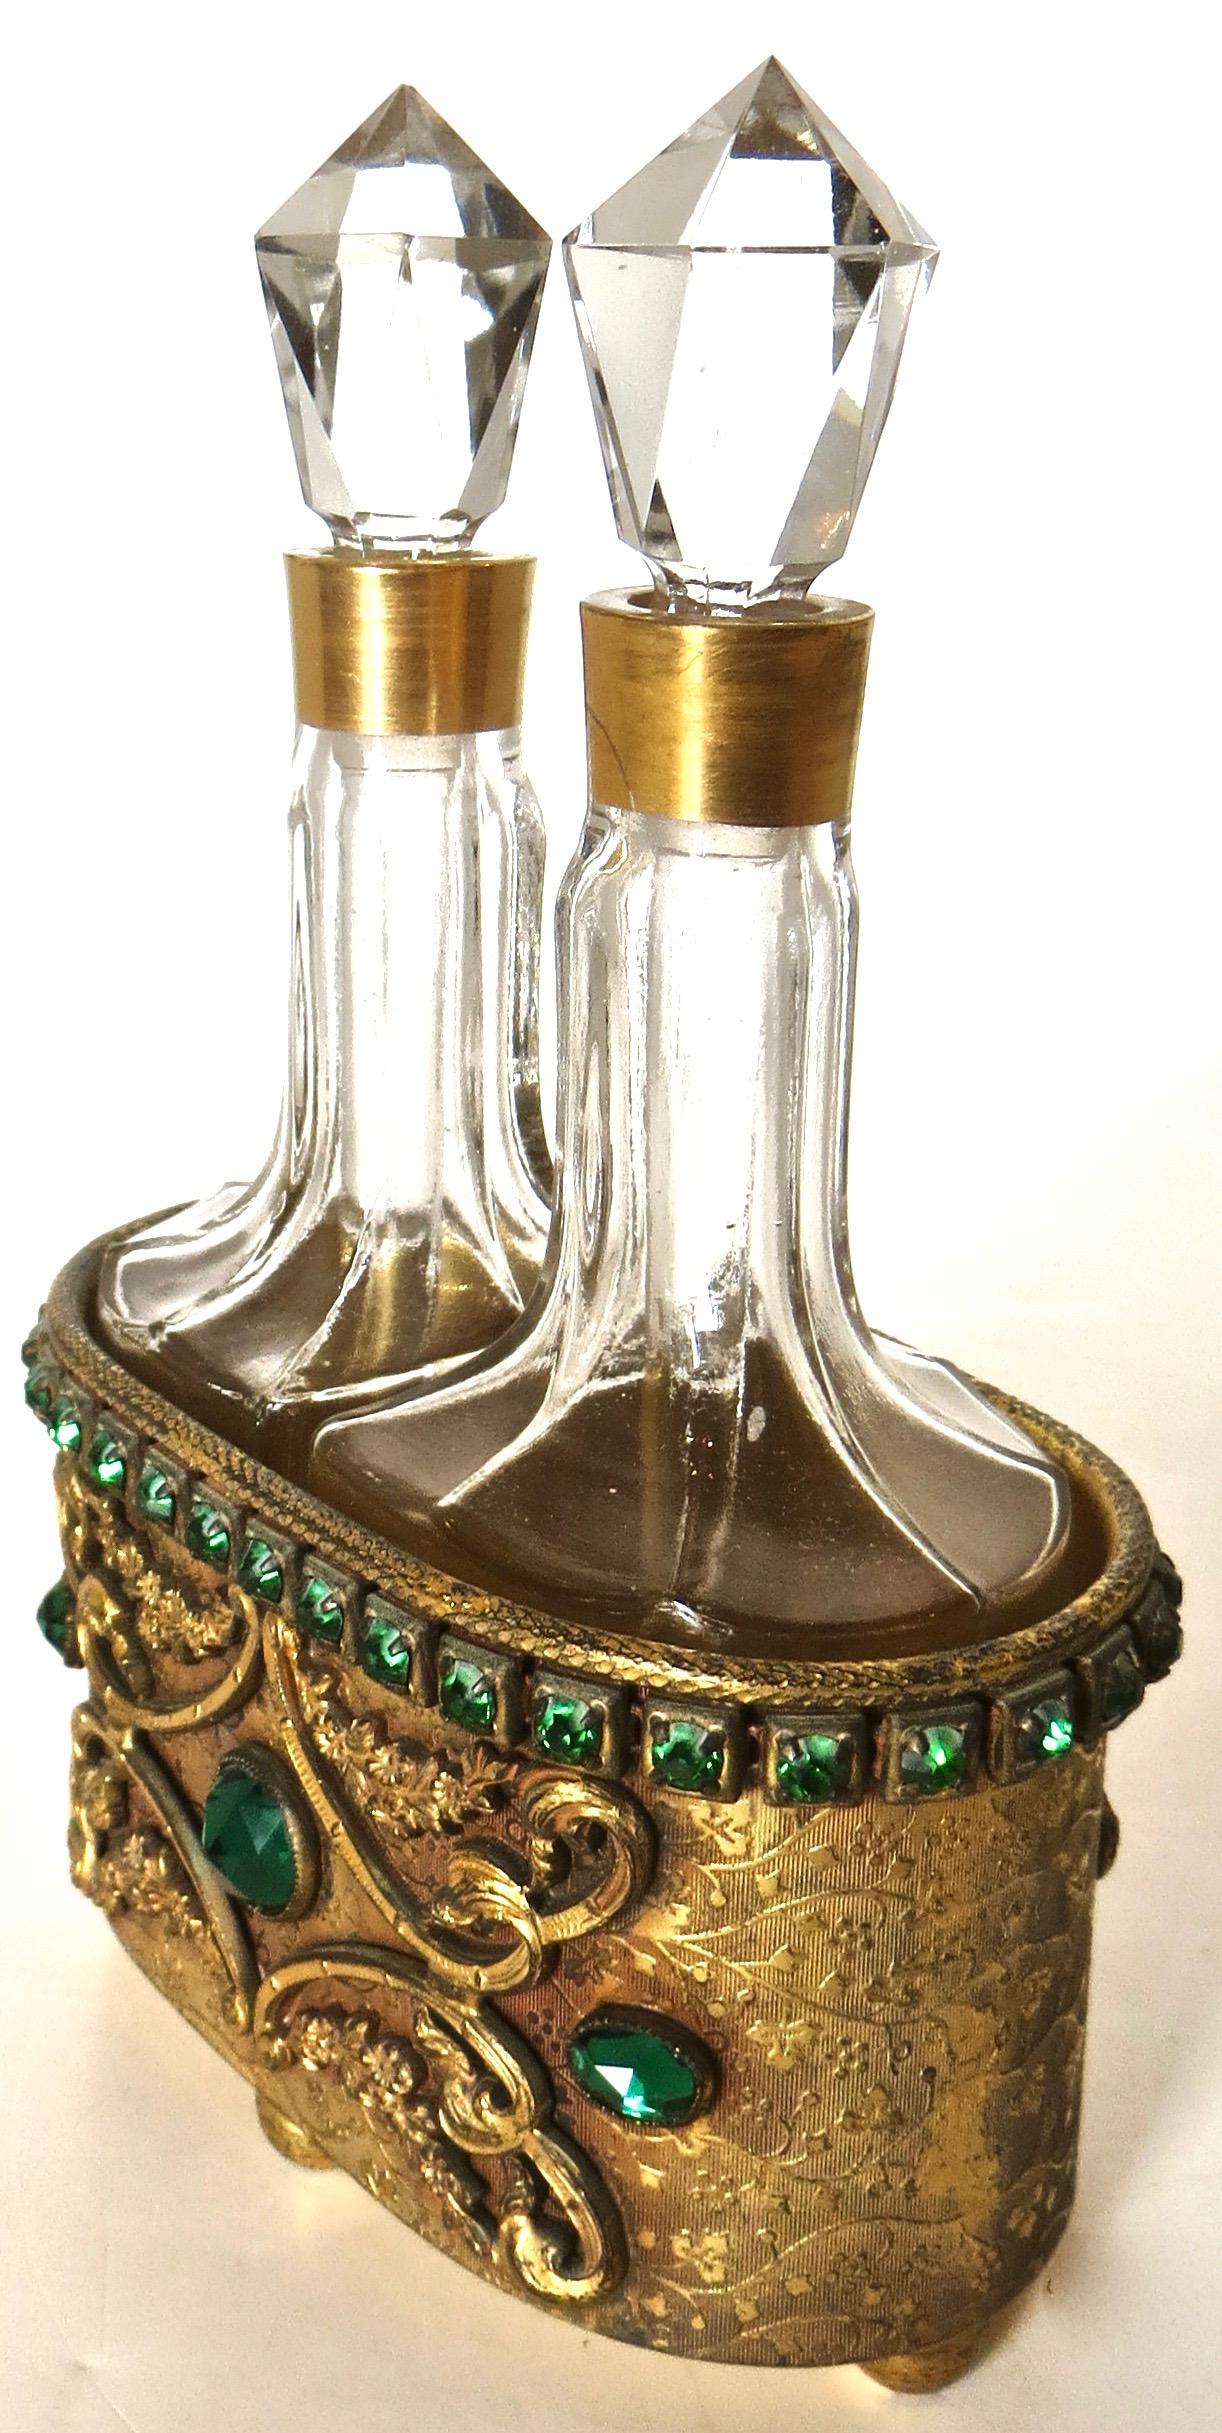 Two Perfume Bottles in Fitted Casket on Decorated Tray by E. & J. Bass, Ca 1900 In Good Condition For Sale In Incline Village, NV